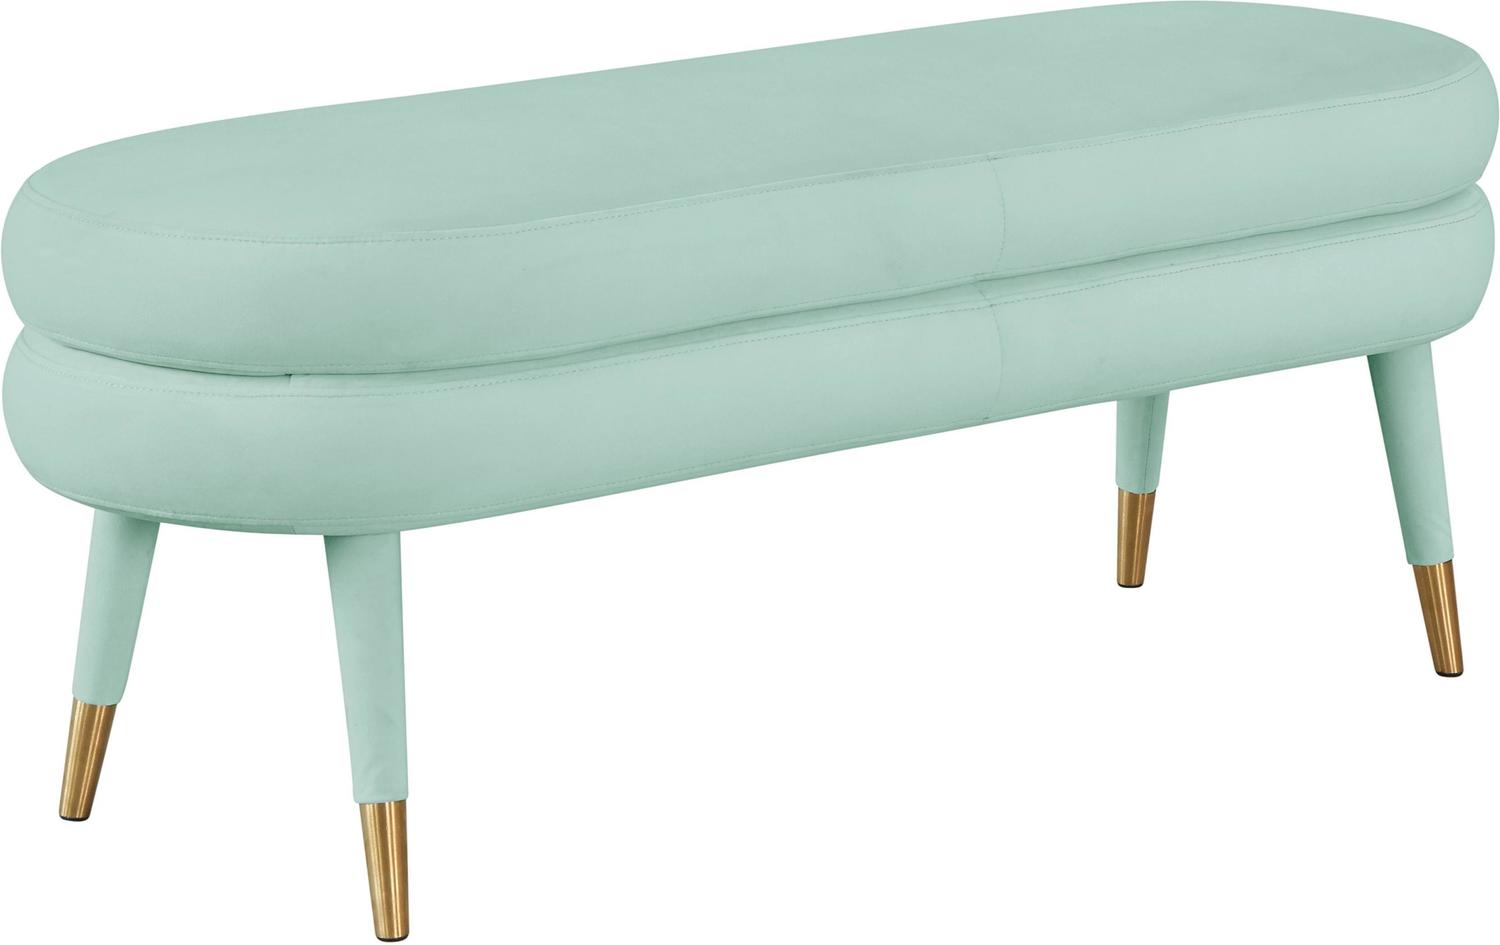  Tov Furniture Benches Ottomans and Benches Sea Foam Green